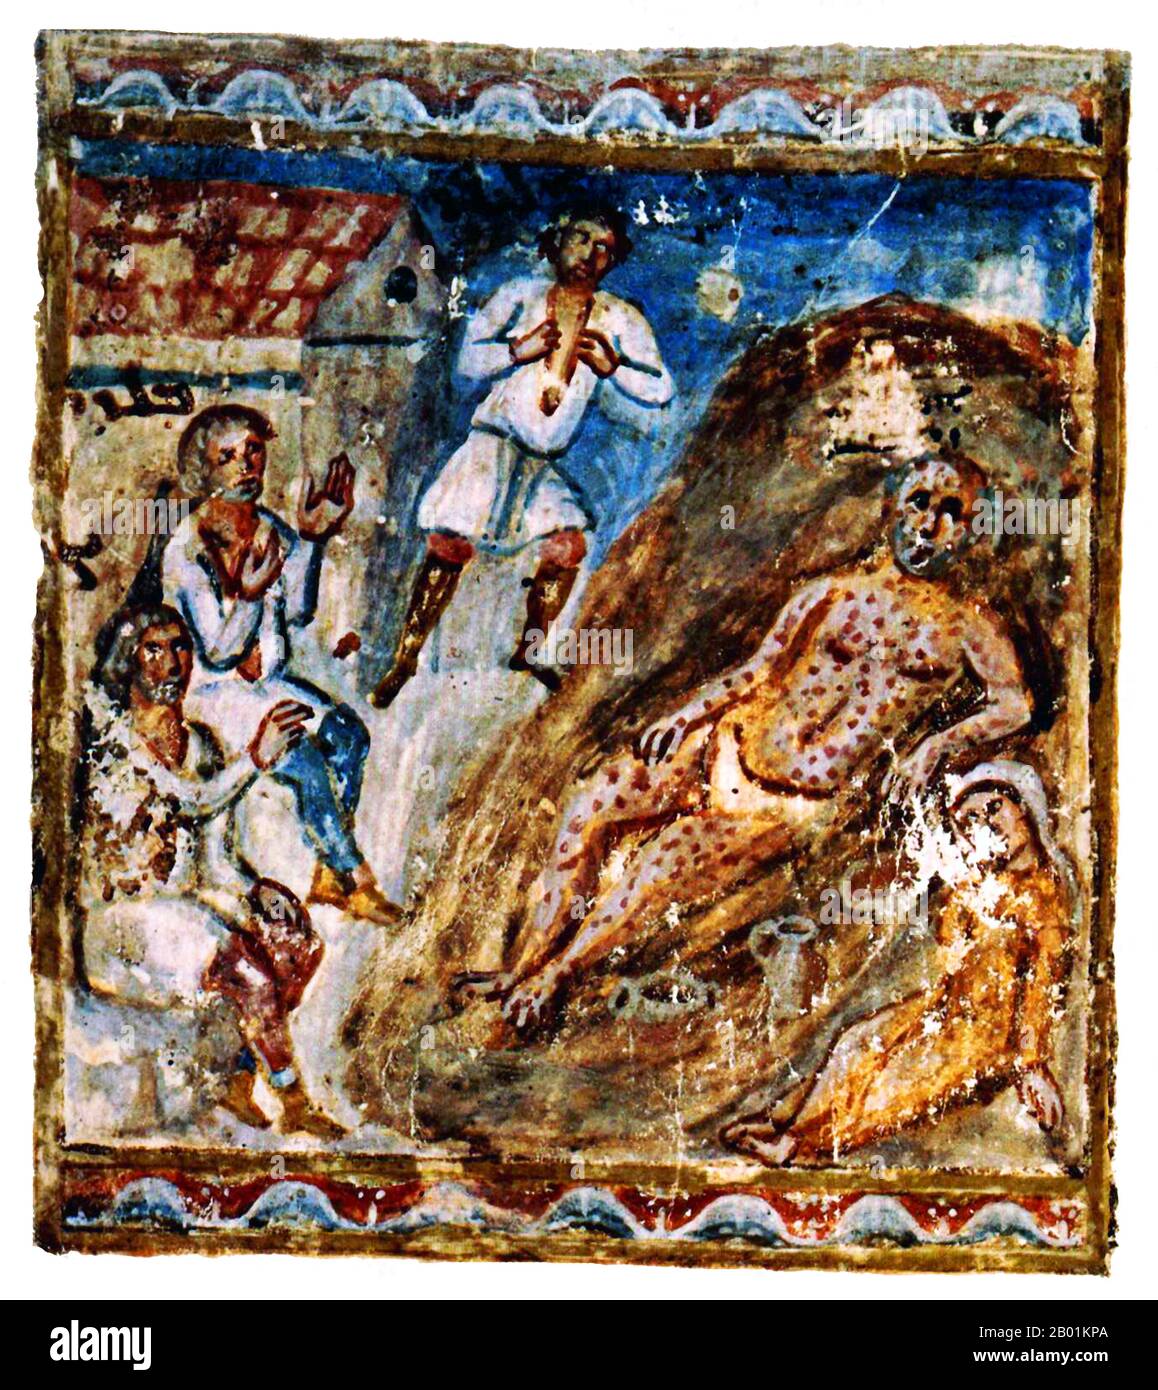 Iraq: 'The Suffering of Job'. Miniature folio from the Syriac Bible of Paris, 6th-7th century.  Job is the central character of the Book of Job in the Hebrew Bible. Job is also recognised as a prophet of God in the Qur'an.  The Book of Job begins with an introduction to Job's character. He is described as a blessed man who lives righteously. God's praise of Job prompts Satan to challenge Job's integrity and suggesting that Job serves God simply because he protects him. God removes Job's protection, allowing Satan to take his wealth, his children, and his physical health in order to tempt Job. Stock Photo